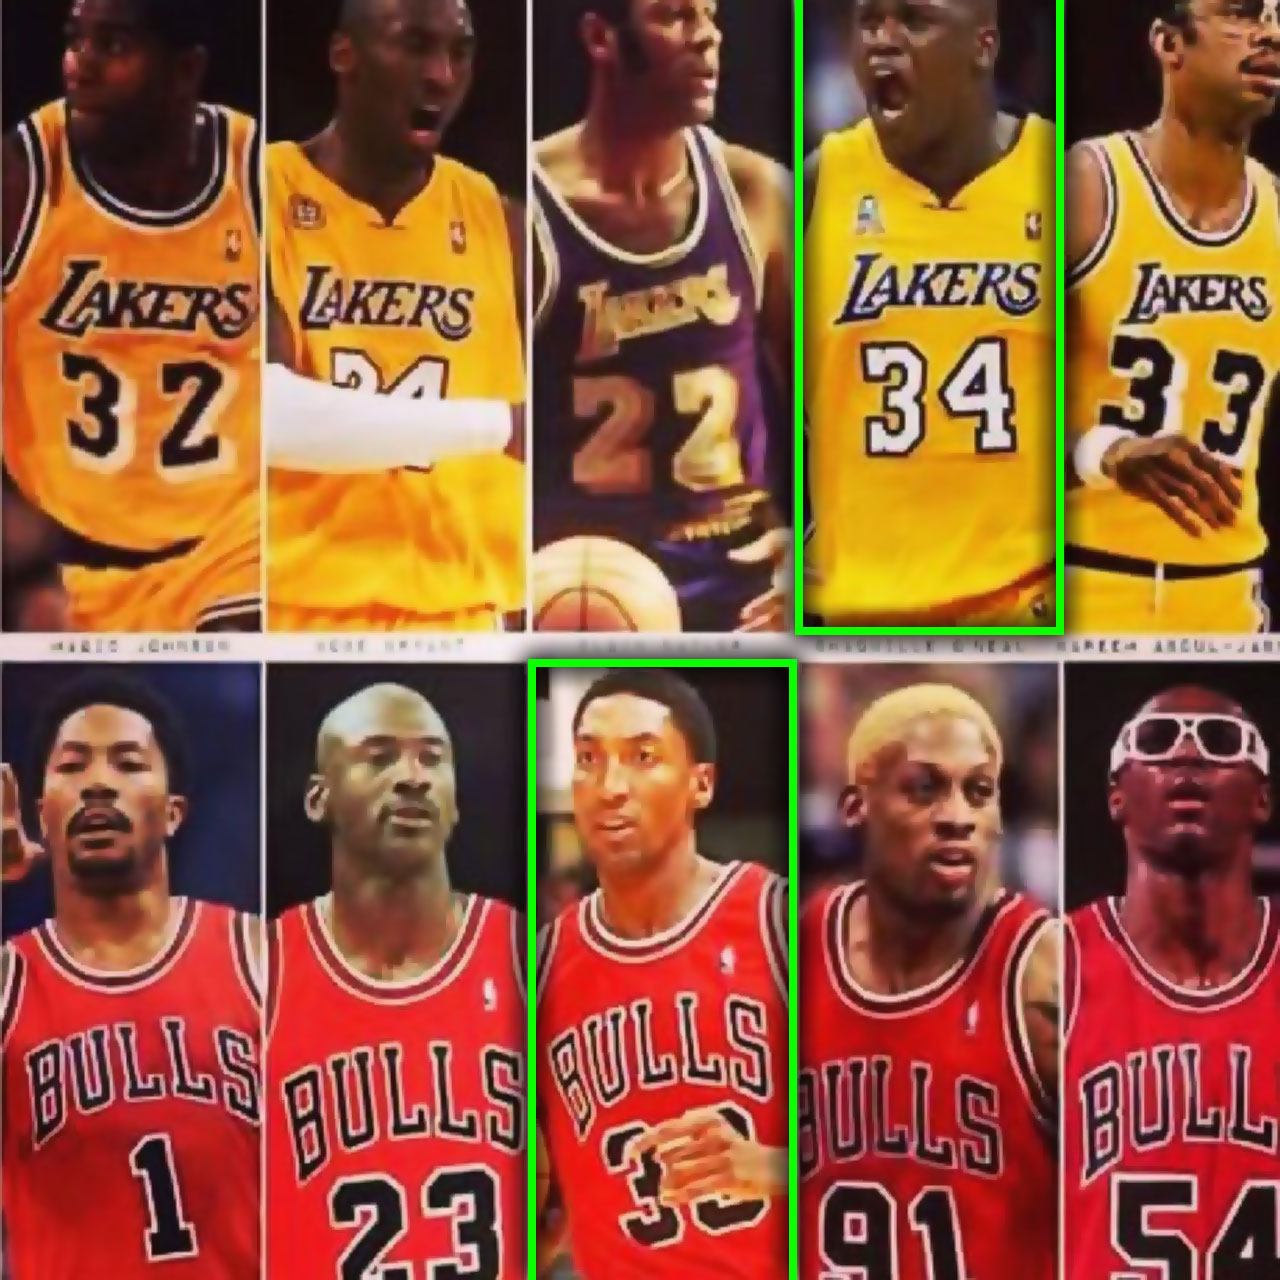 Shaquille O'Neal's Lakers team would beat Scottie Pippen's Bulls